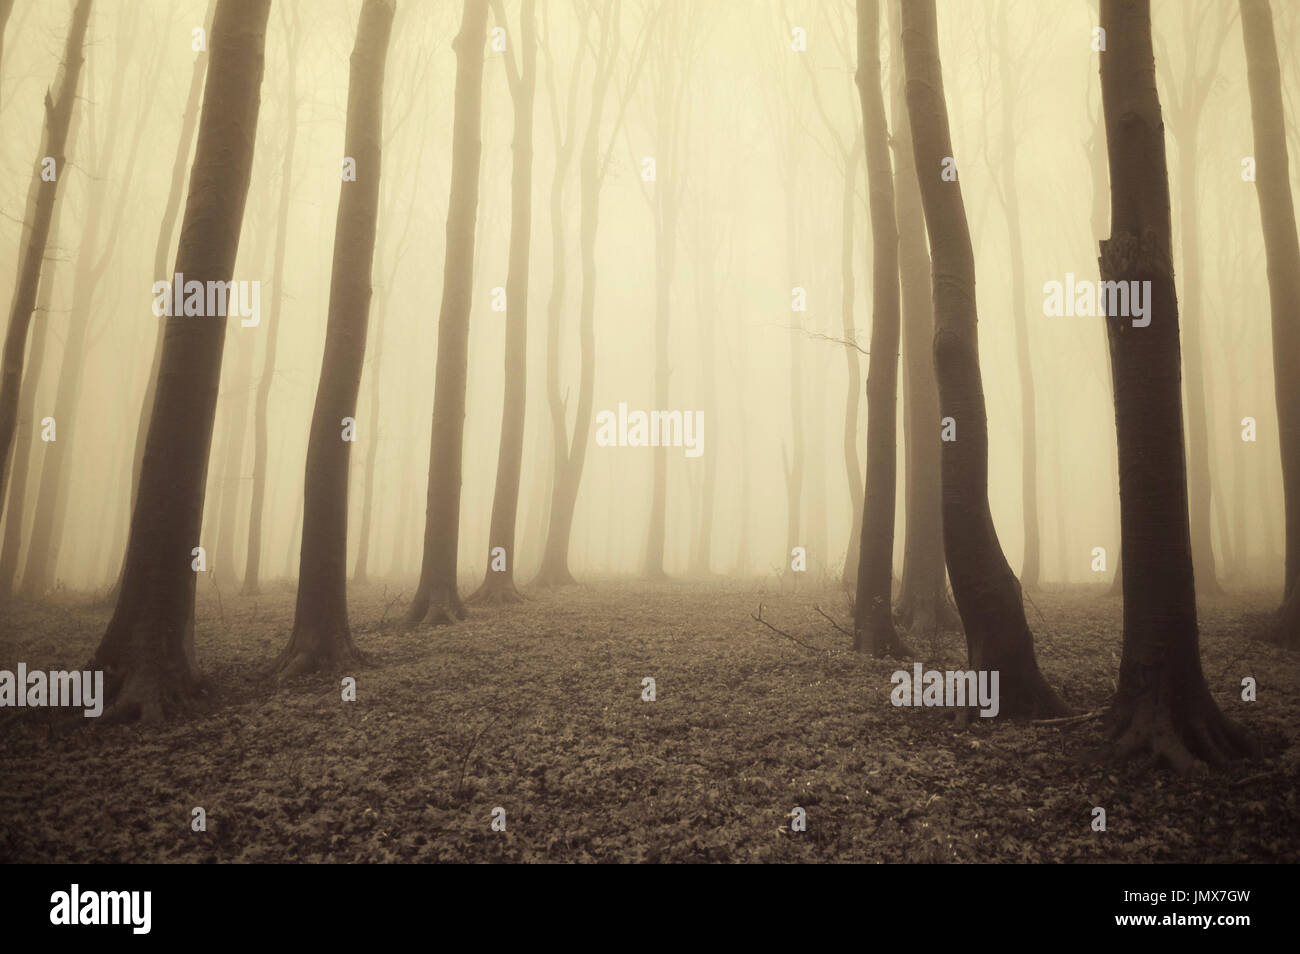 mysterious forest landscape with trees in fog Stock Photo